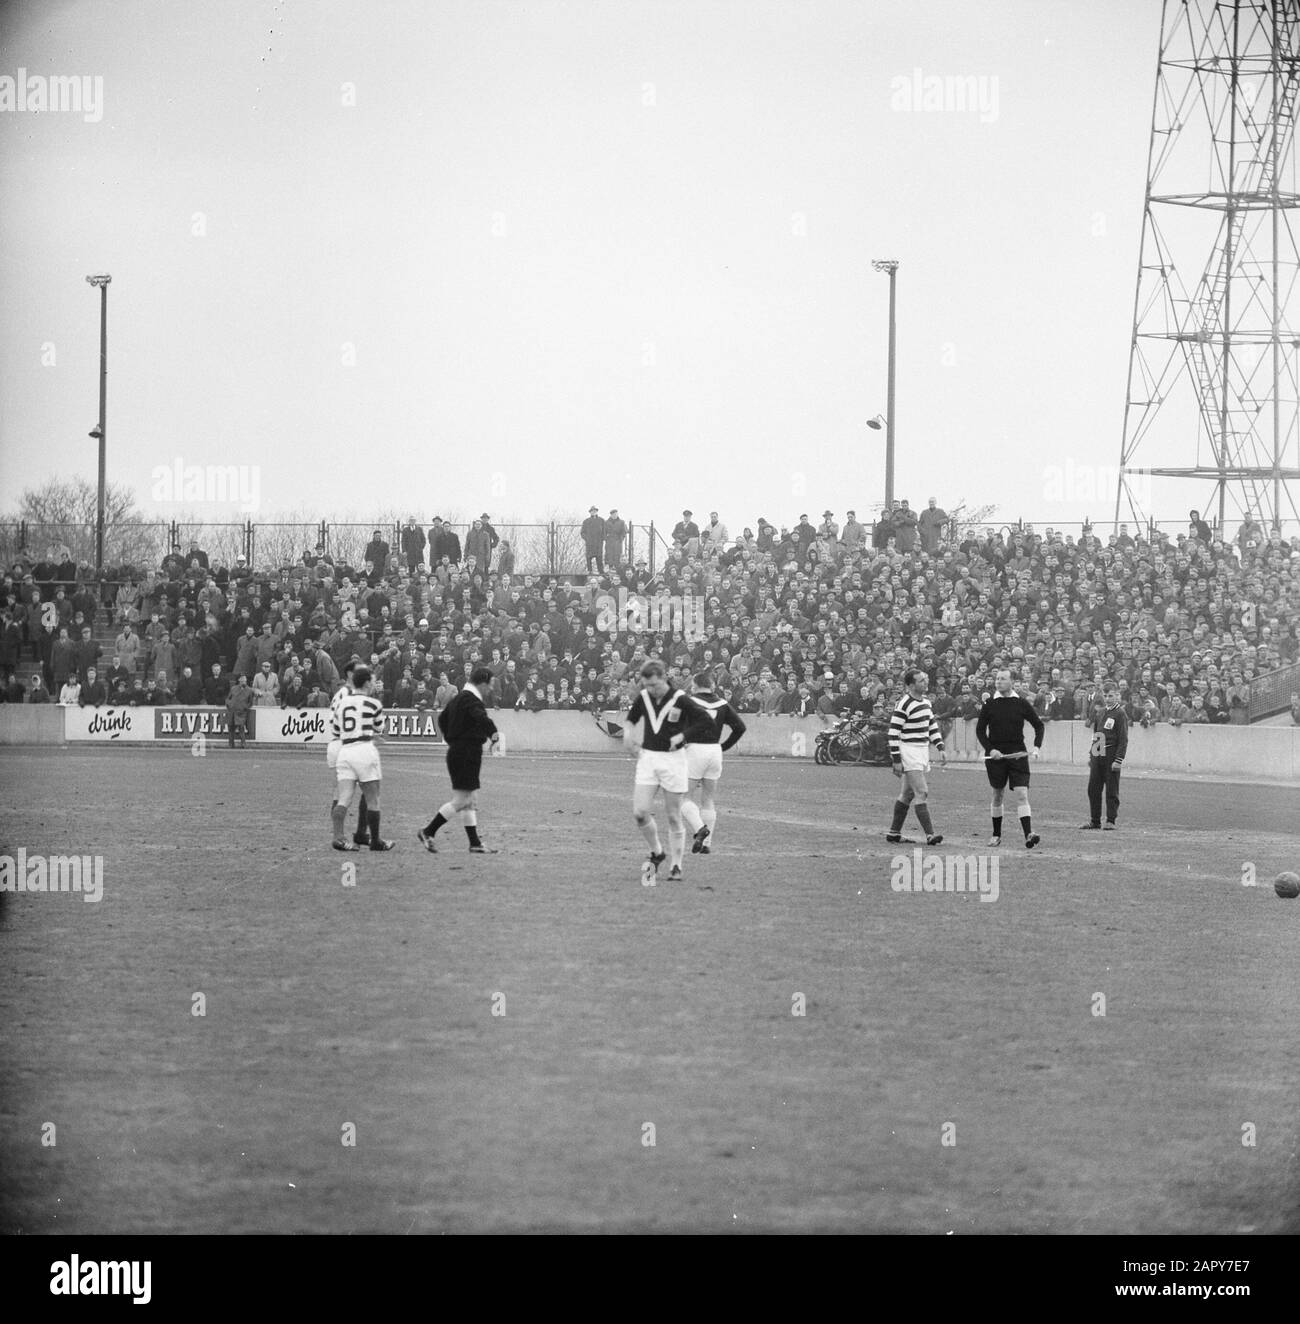 Enschede vs. Blue White 0-1. Ruje van Blauw Wit sent out the field Date: March 24, 1963 Location: Enschede Keywords: sport, football Institution name: Blue White Stock Photo